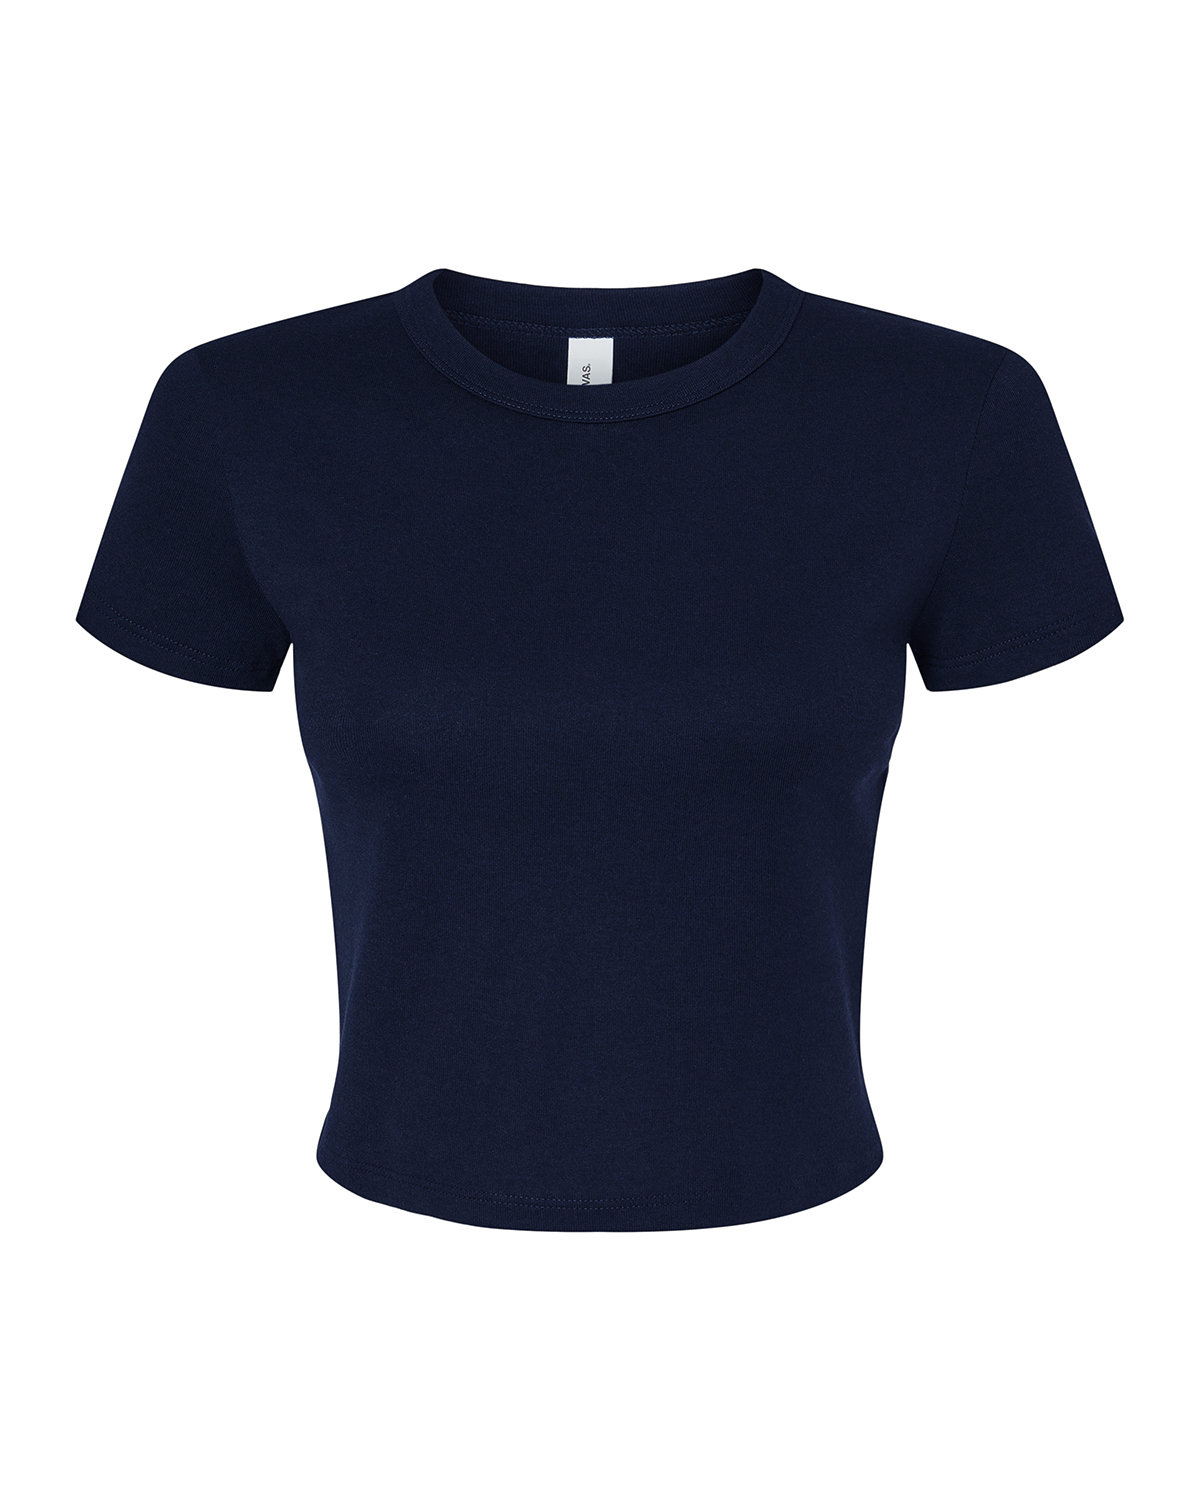 click to view SOLID NAVY BLEND